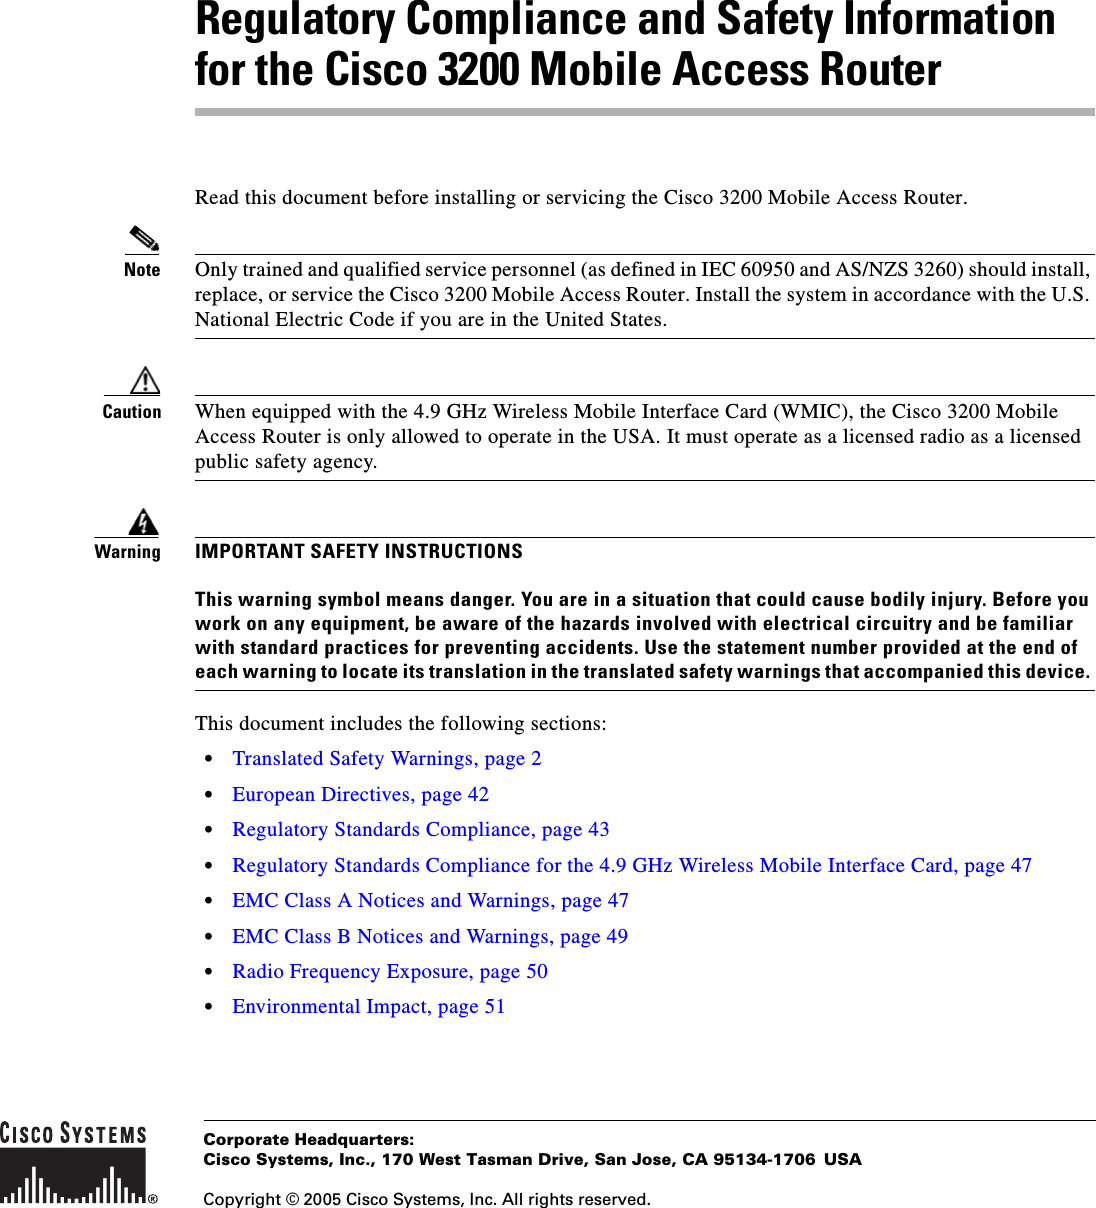 Corporate Headquarters:Copyright © 2005 Cisco Systems, Inc. All rights reserved.Cisco Systems, Inc., 170 West Tasman Drive, San Jose, CA 95134-1706 USARegulatory Compliance and Safety Information for the Cisco 3200 Mobile Access RouterRead this document before installing or servicing the Cisco 3200 Mobile Access Router. Note Only trained and qualified service personnel (as defined in IEC 60950 and AS/NZS 3260) should install, replace, or service the Cisco 3200 Mobile Access Router. Install the system in accordance with the U.S. National Electric Code if you are in the United States.Caution When equipped with the 4.9 GHz Wireless Mobile Interface Card (WMIC), the Cisco 3200 Mobile Access Router is only allowed to operate in the USA. It must operate as a licensed radio as a licensed public safety agency.WarningIMPORTANT SAFETY INSTRUCTIONSThis warning symbol means danger. You are in a situation that could cause bodily injury. Before you work on any equipment, be aware of the hazards involved with electrical circuitry and be familiar with standard practices for preventing accidents. Use the statement number provided at the end of each warning to locate its translation in the translated safety warnings that accompanied this device. This document includes the following sections:•Translated Safety Warnings, page 2•European Directives, page 42•Regulatory Standards Compliance, page 43•Regulatory Standards Compliance for the 4.9 GHz Wireless Mobile Interface Card, page 47•EMC Class A Notices and Warnings, page 47•EMC Class B Notices and Warnings, page 49•Radio Frequency Exposure, page 50•Environmental Impact, page 51